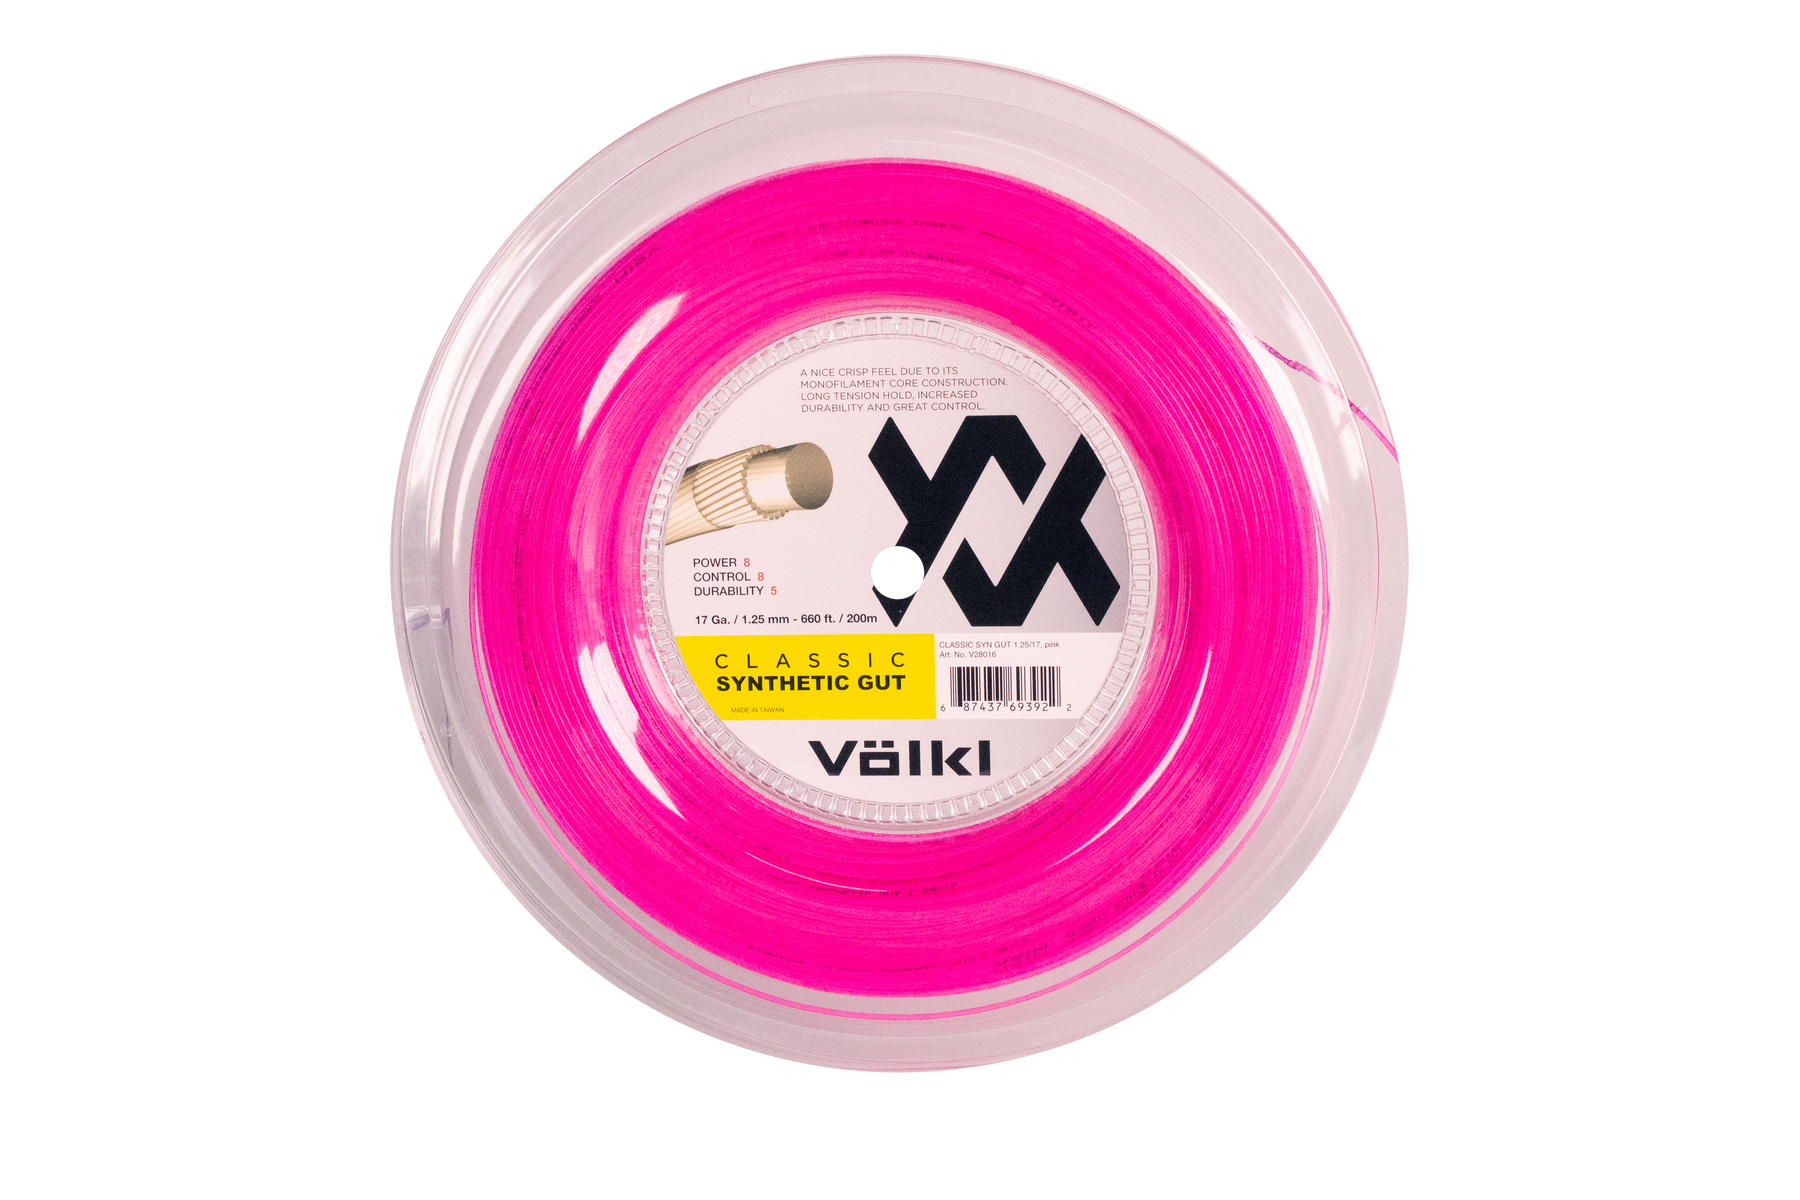 Volkl Classic Synthetic Gut String Reel · 17g · Optic Yellow